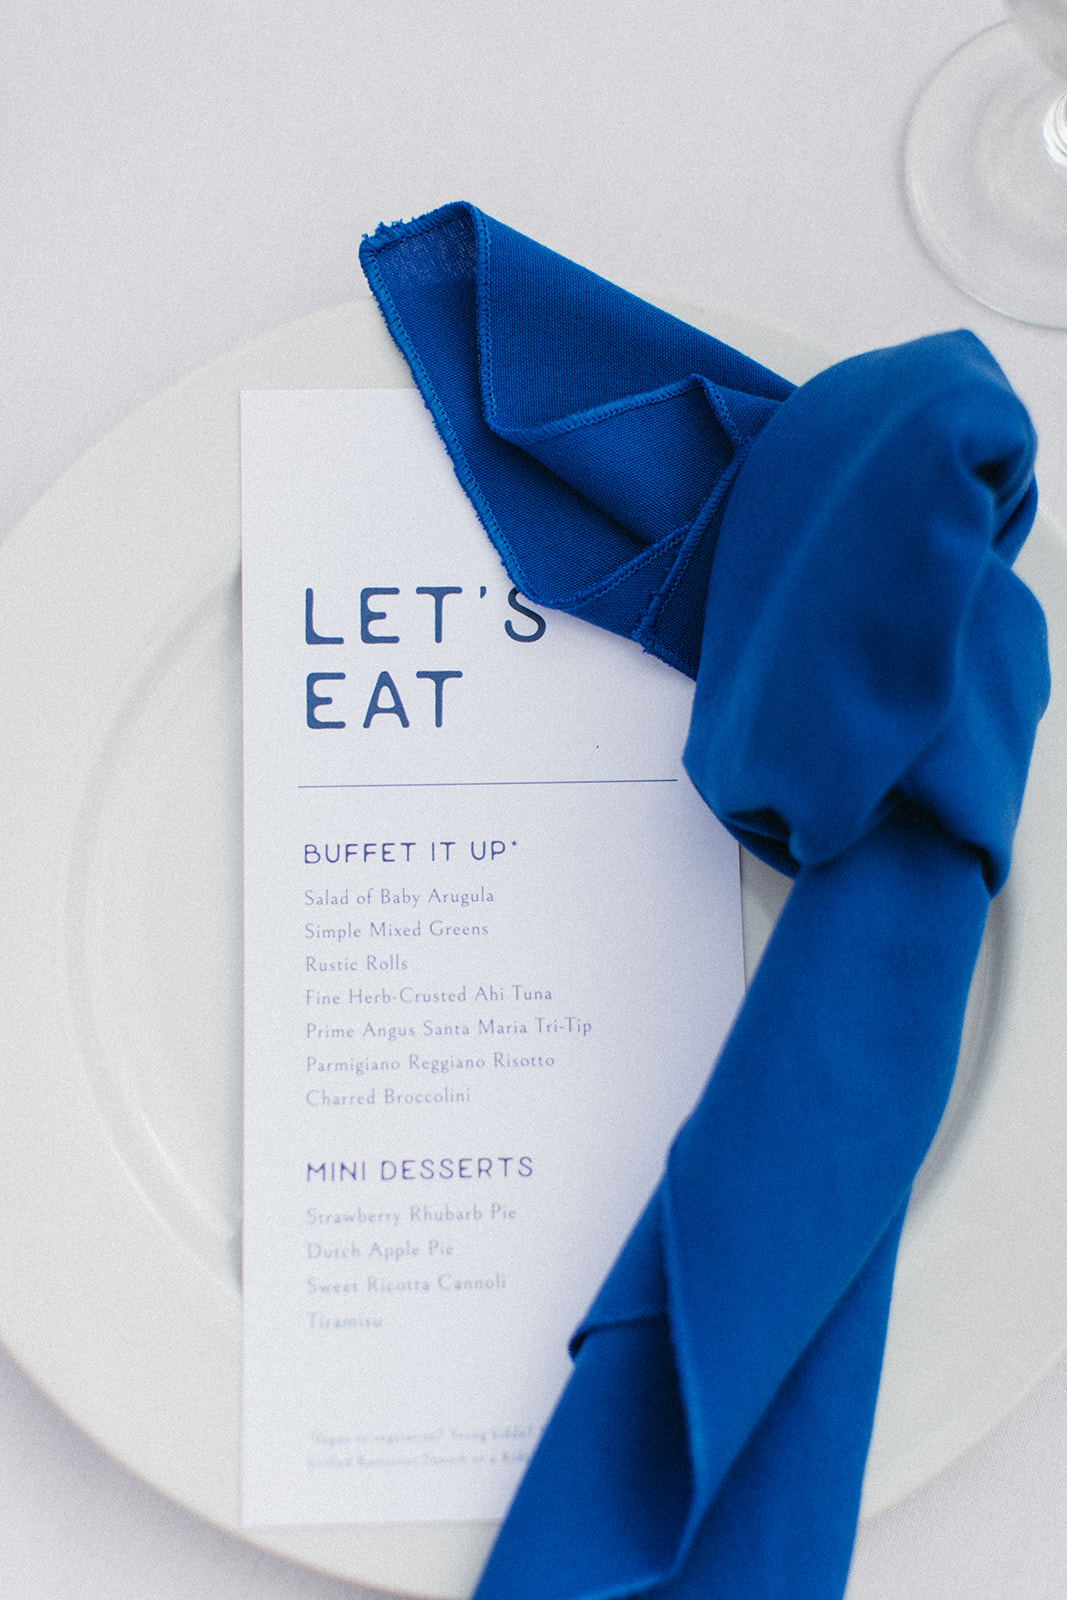 blue napkin on top of menu card in matching blue font